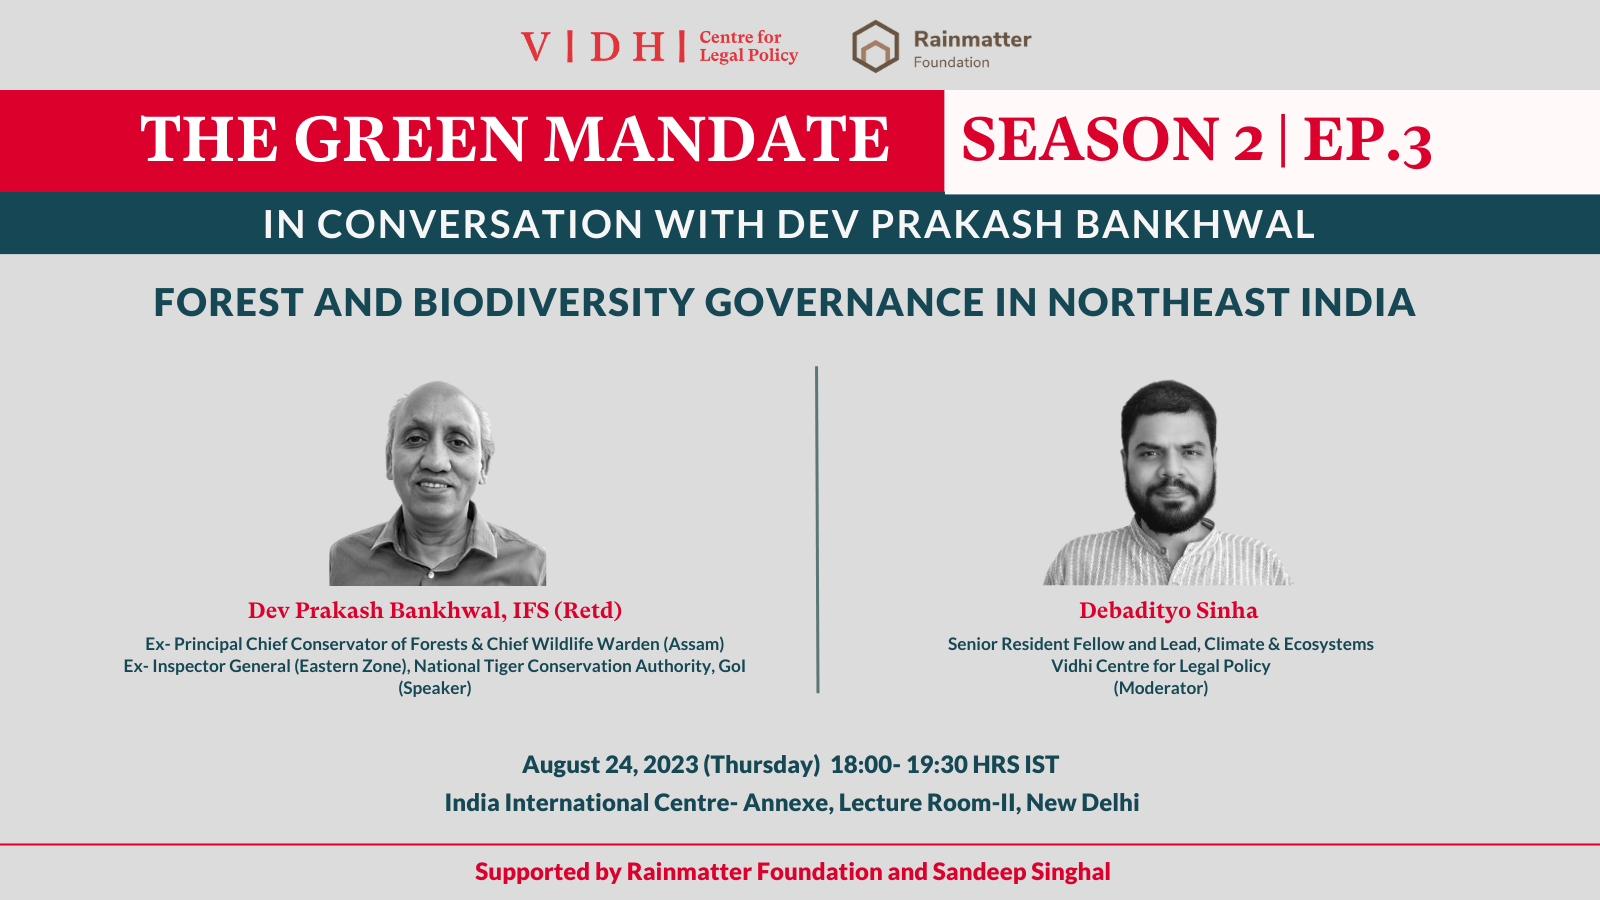 Poster of The Green Mandate Season 2 Episode 3- 'Forest and Biodiversity Governance in Northeast India' with Mr. Dev Prakash Bankhwal (IFS), Former PCCF & CWLW- Assam